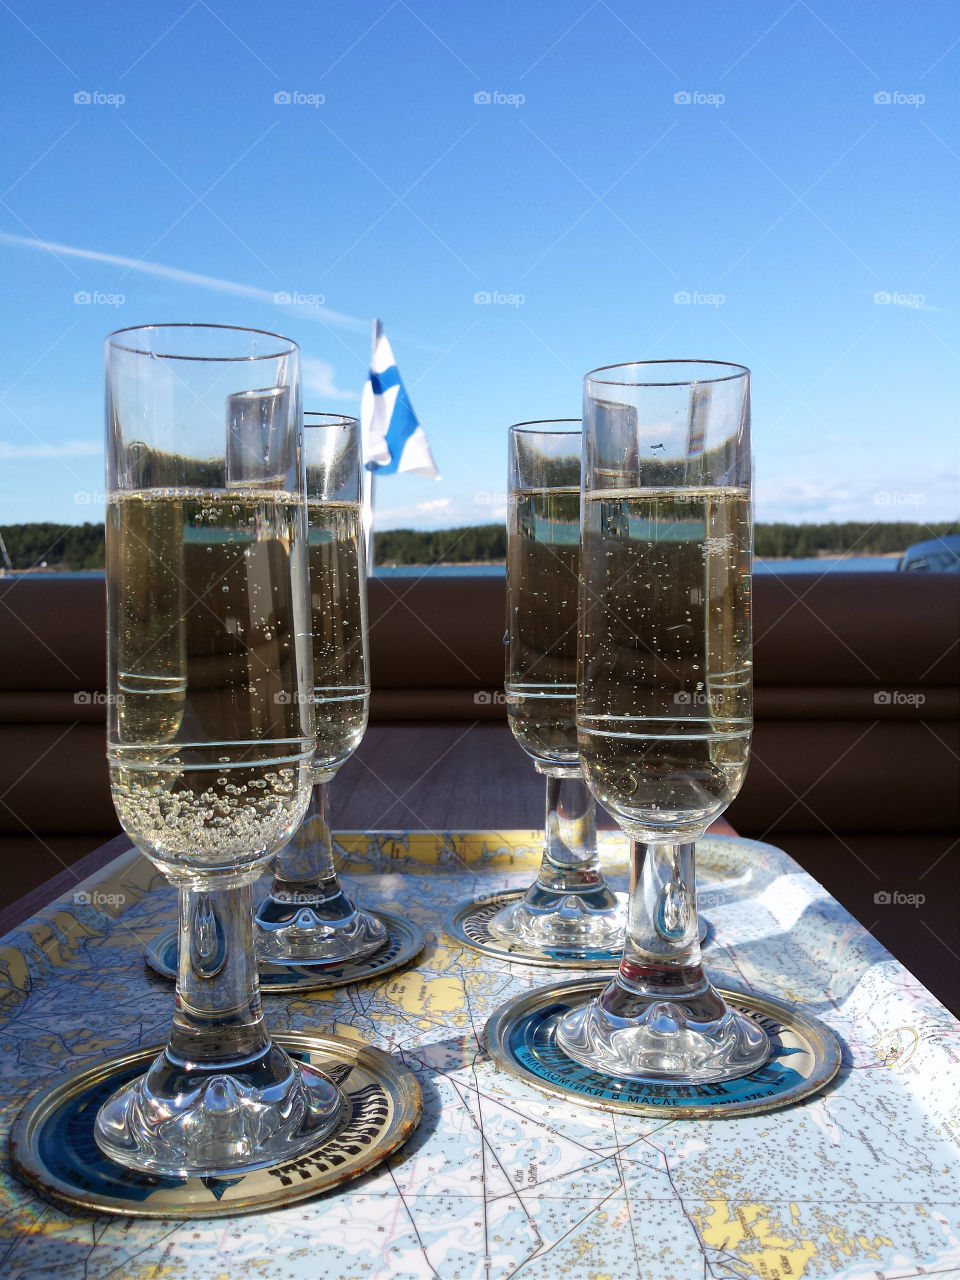 Sparkling wine. Glasses of sparkling wine on a boat in Finland